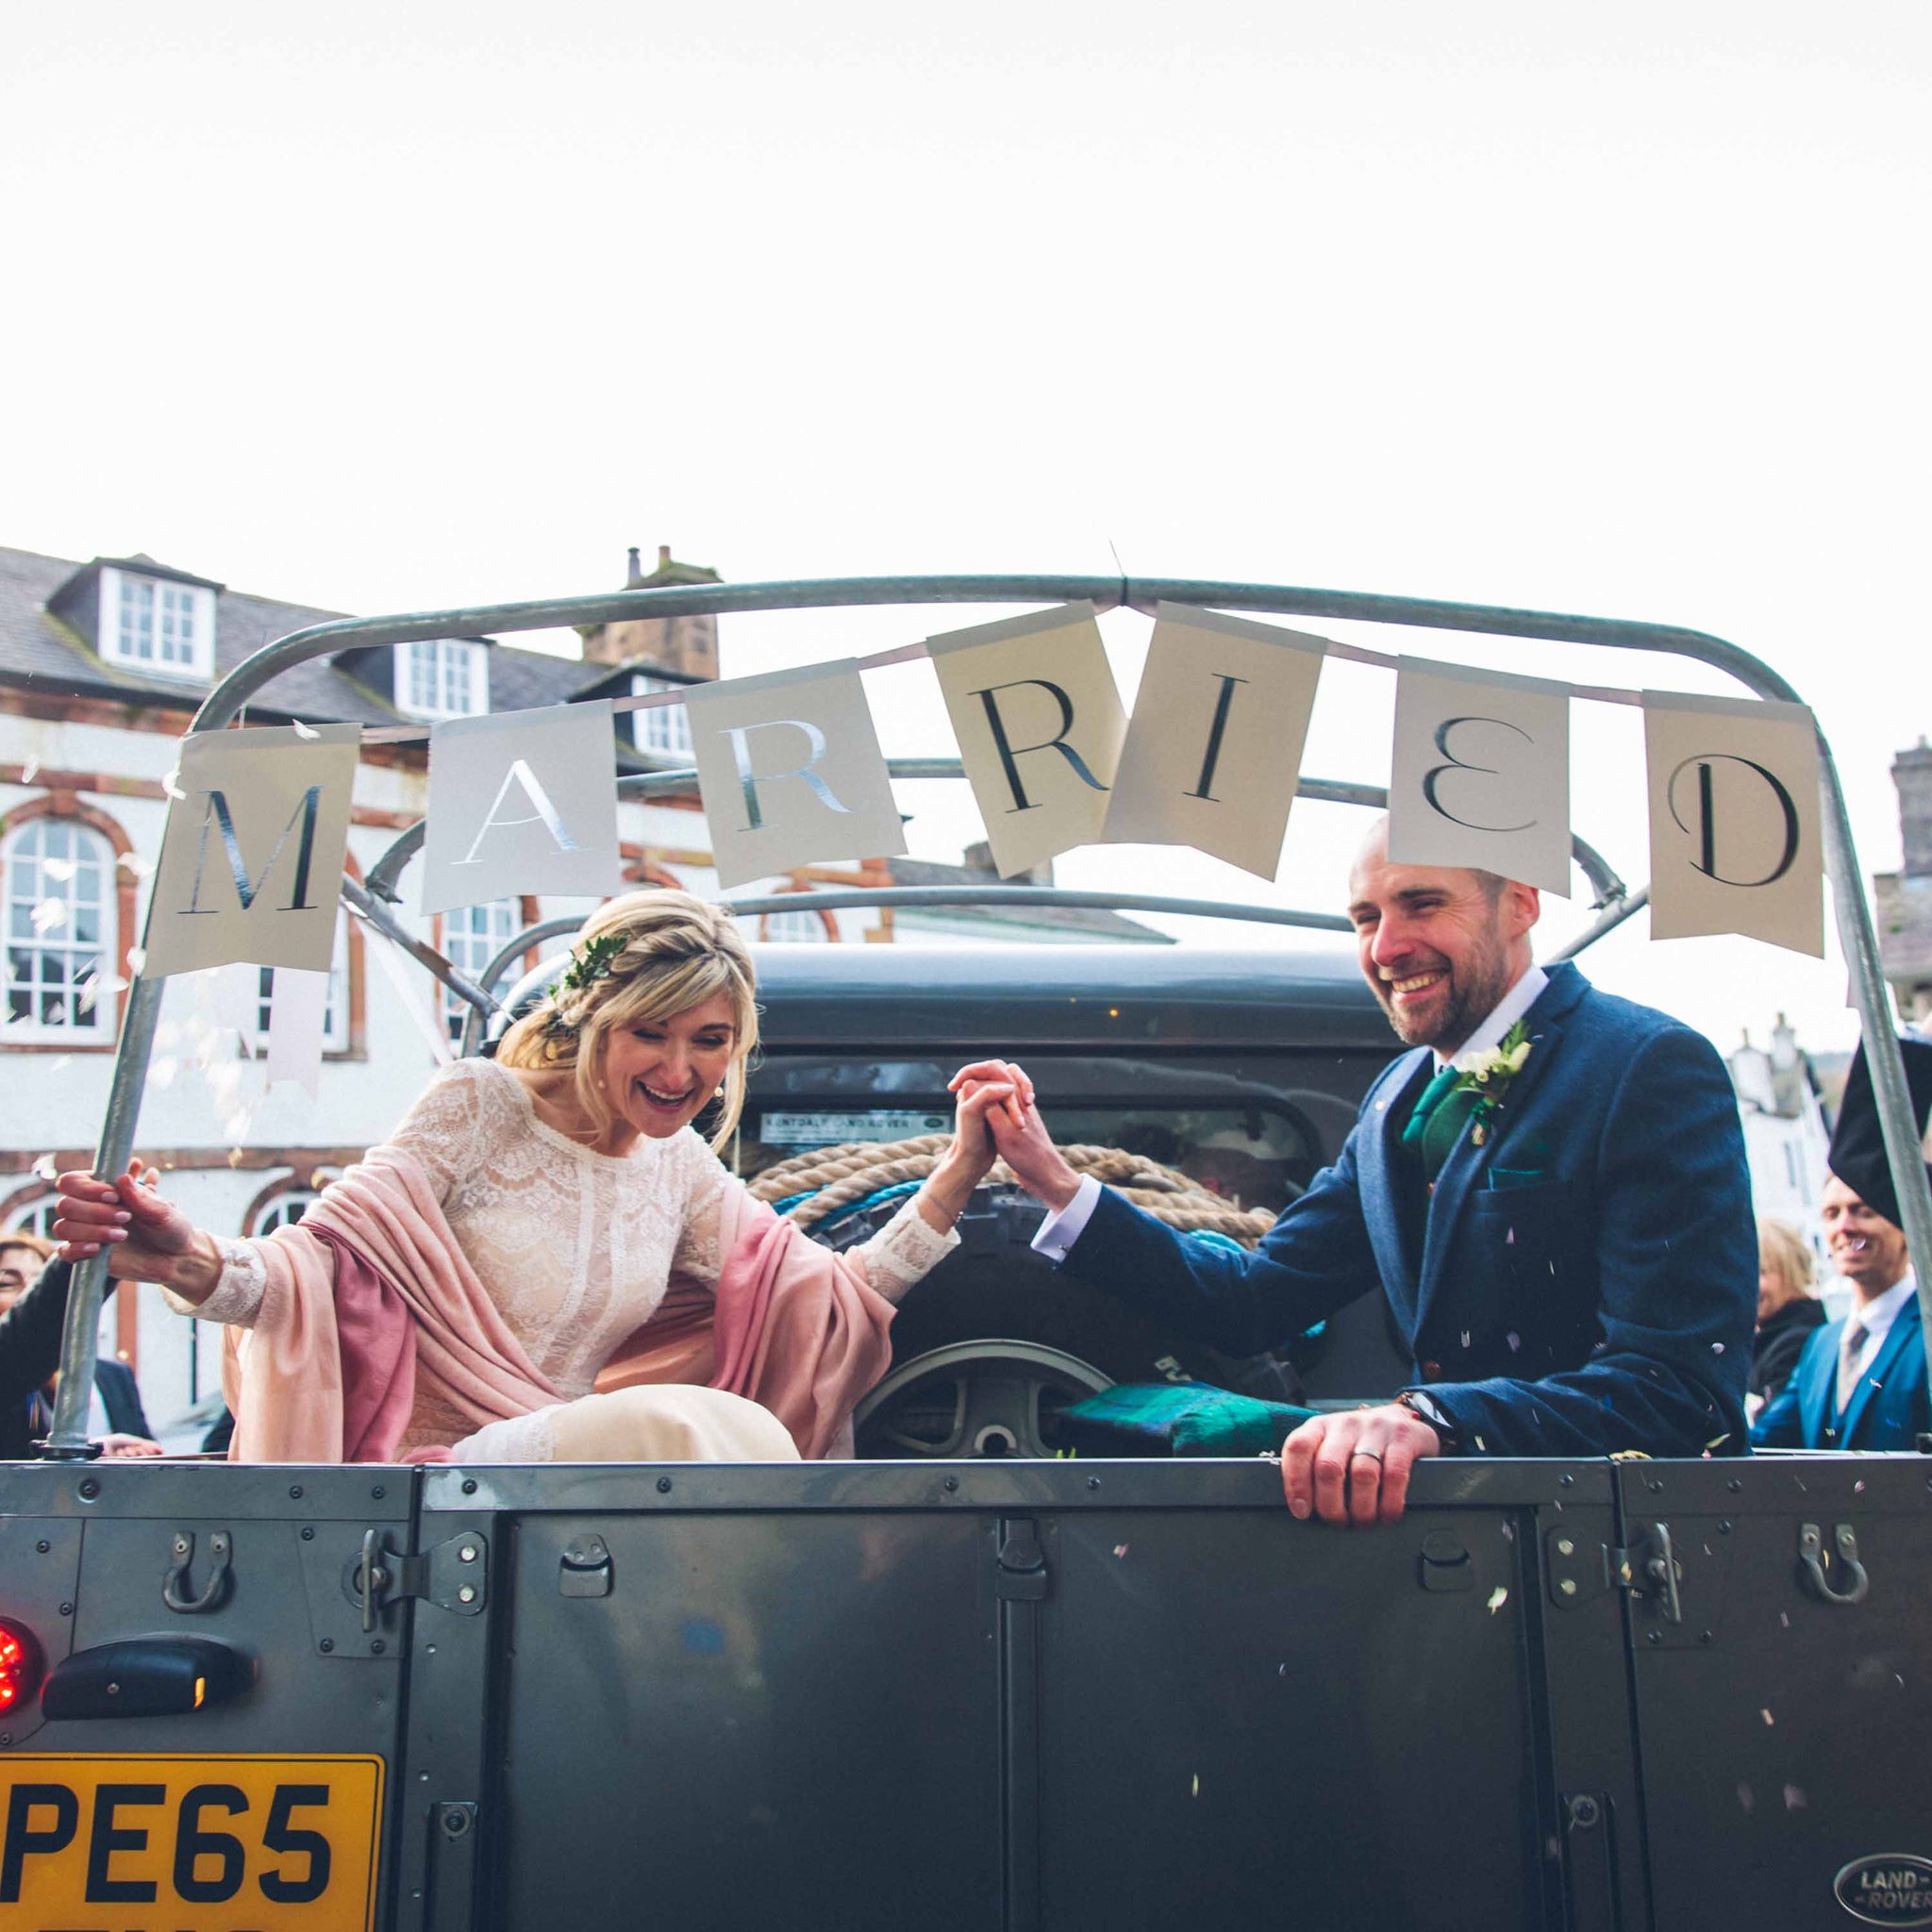 husband and wife in landrover trailer with married lettering above them